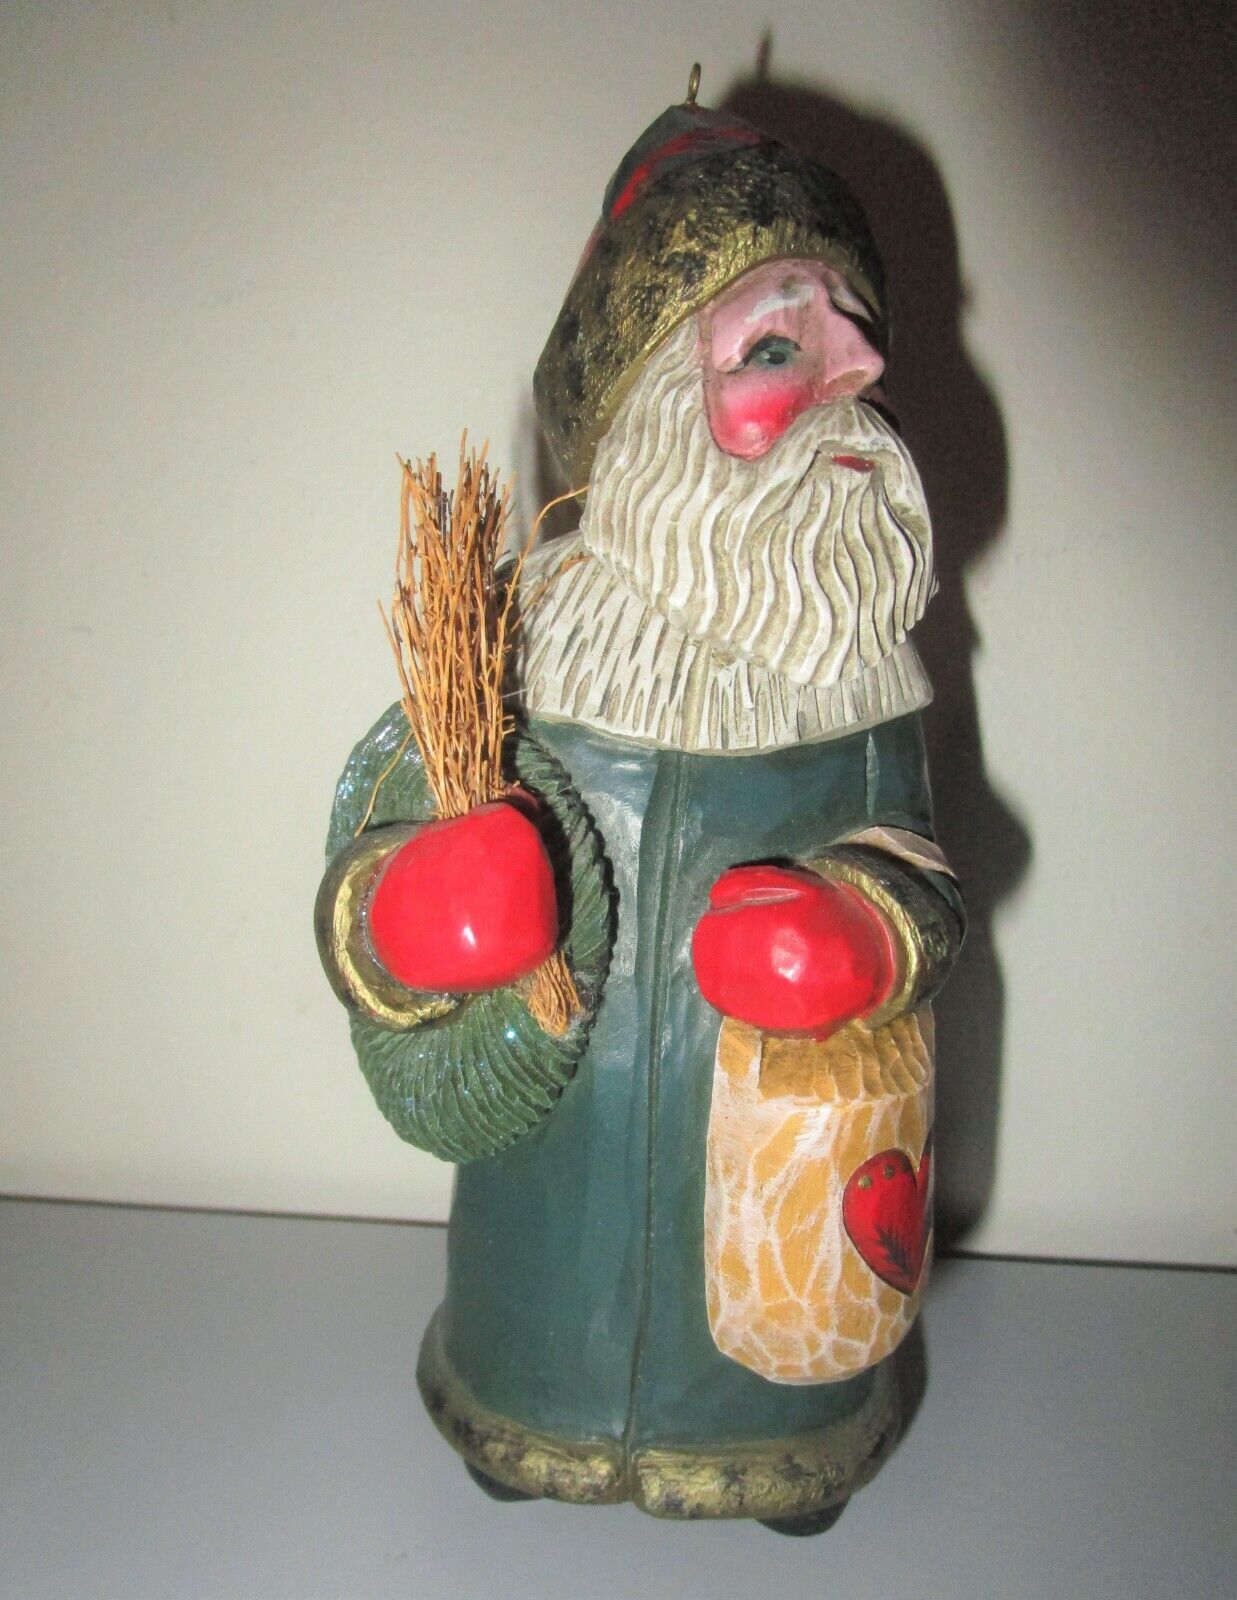 Midwest Cannon Falls Leo Smith Belsnickle Santa Claus Sticks Christmas Ornament Tanie i popularne